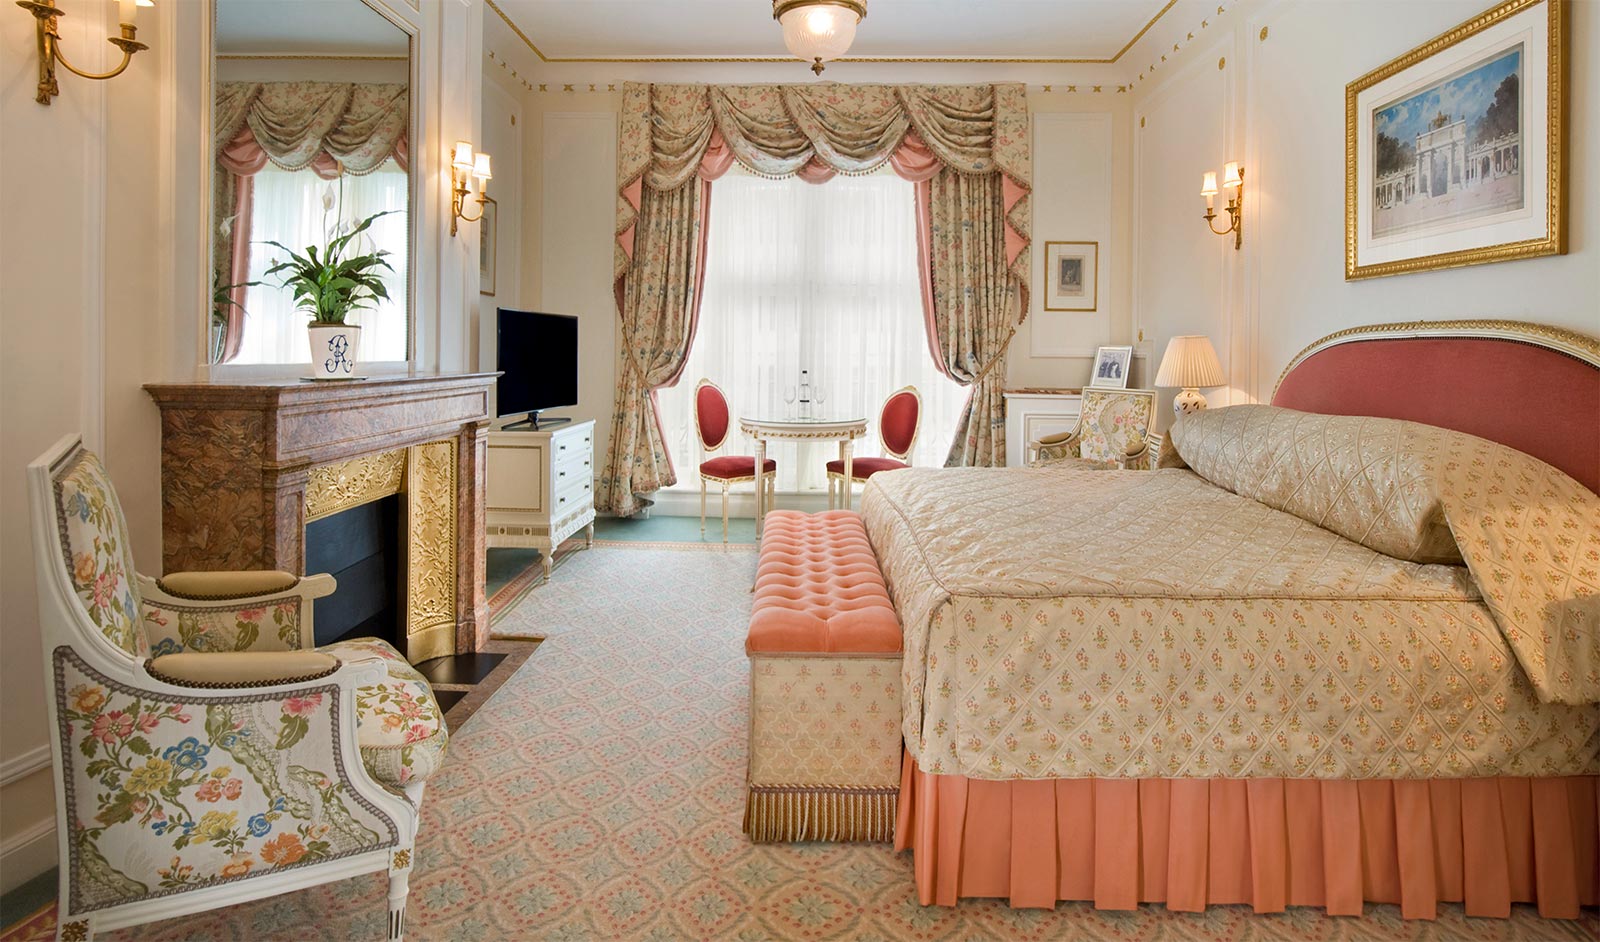 5 Star Luxury Hotel Rooms In Mayfair The Ritz London Hotel